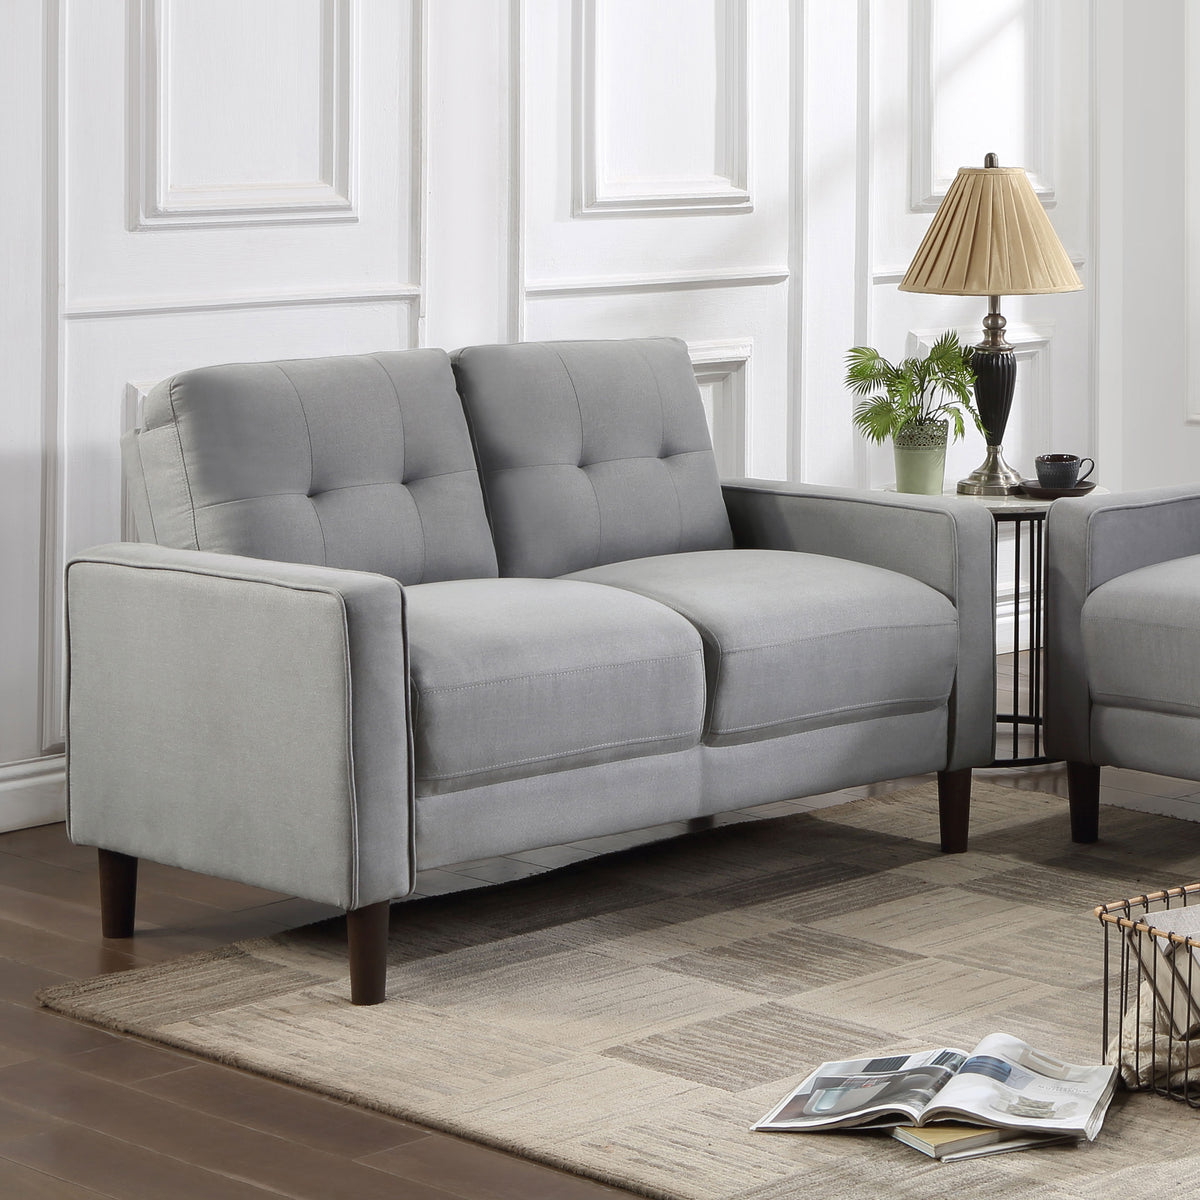 Bowen Upholstered Track Arms Tufted Loveseat  Half Price Furniture